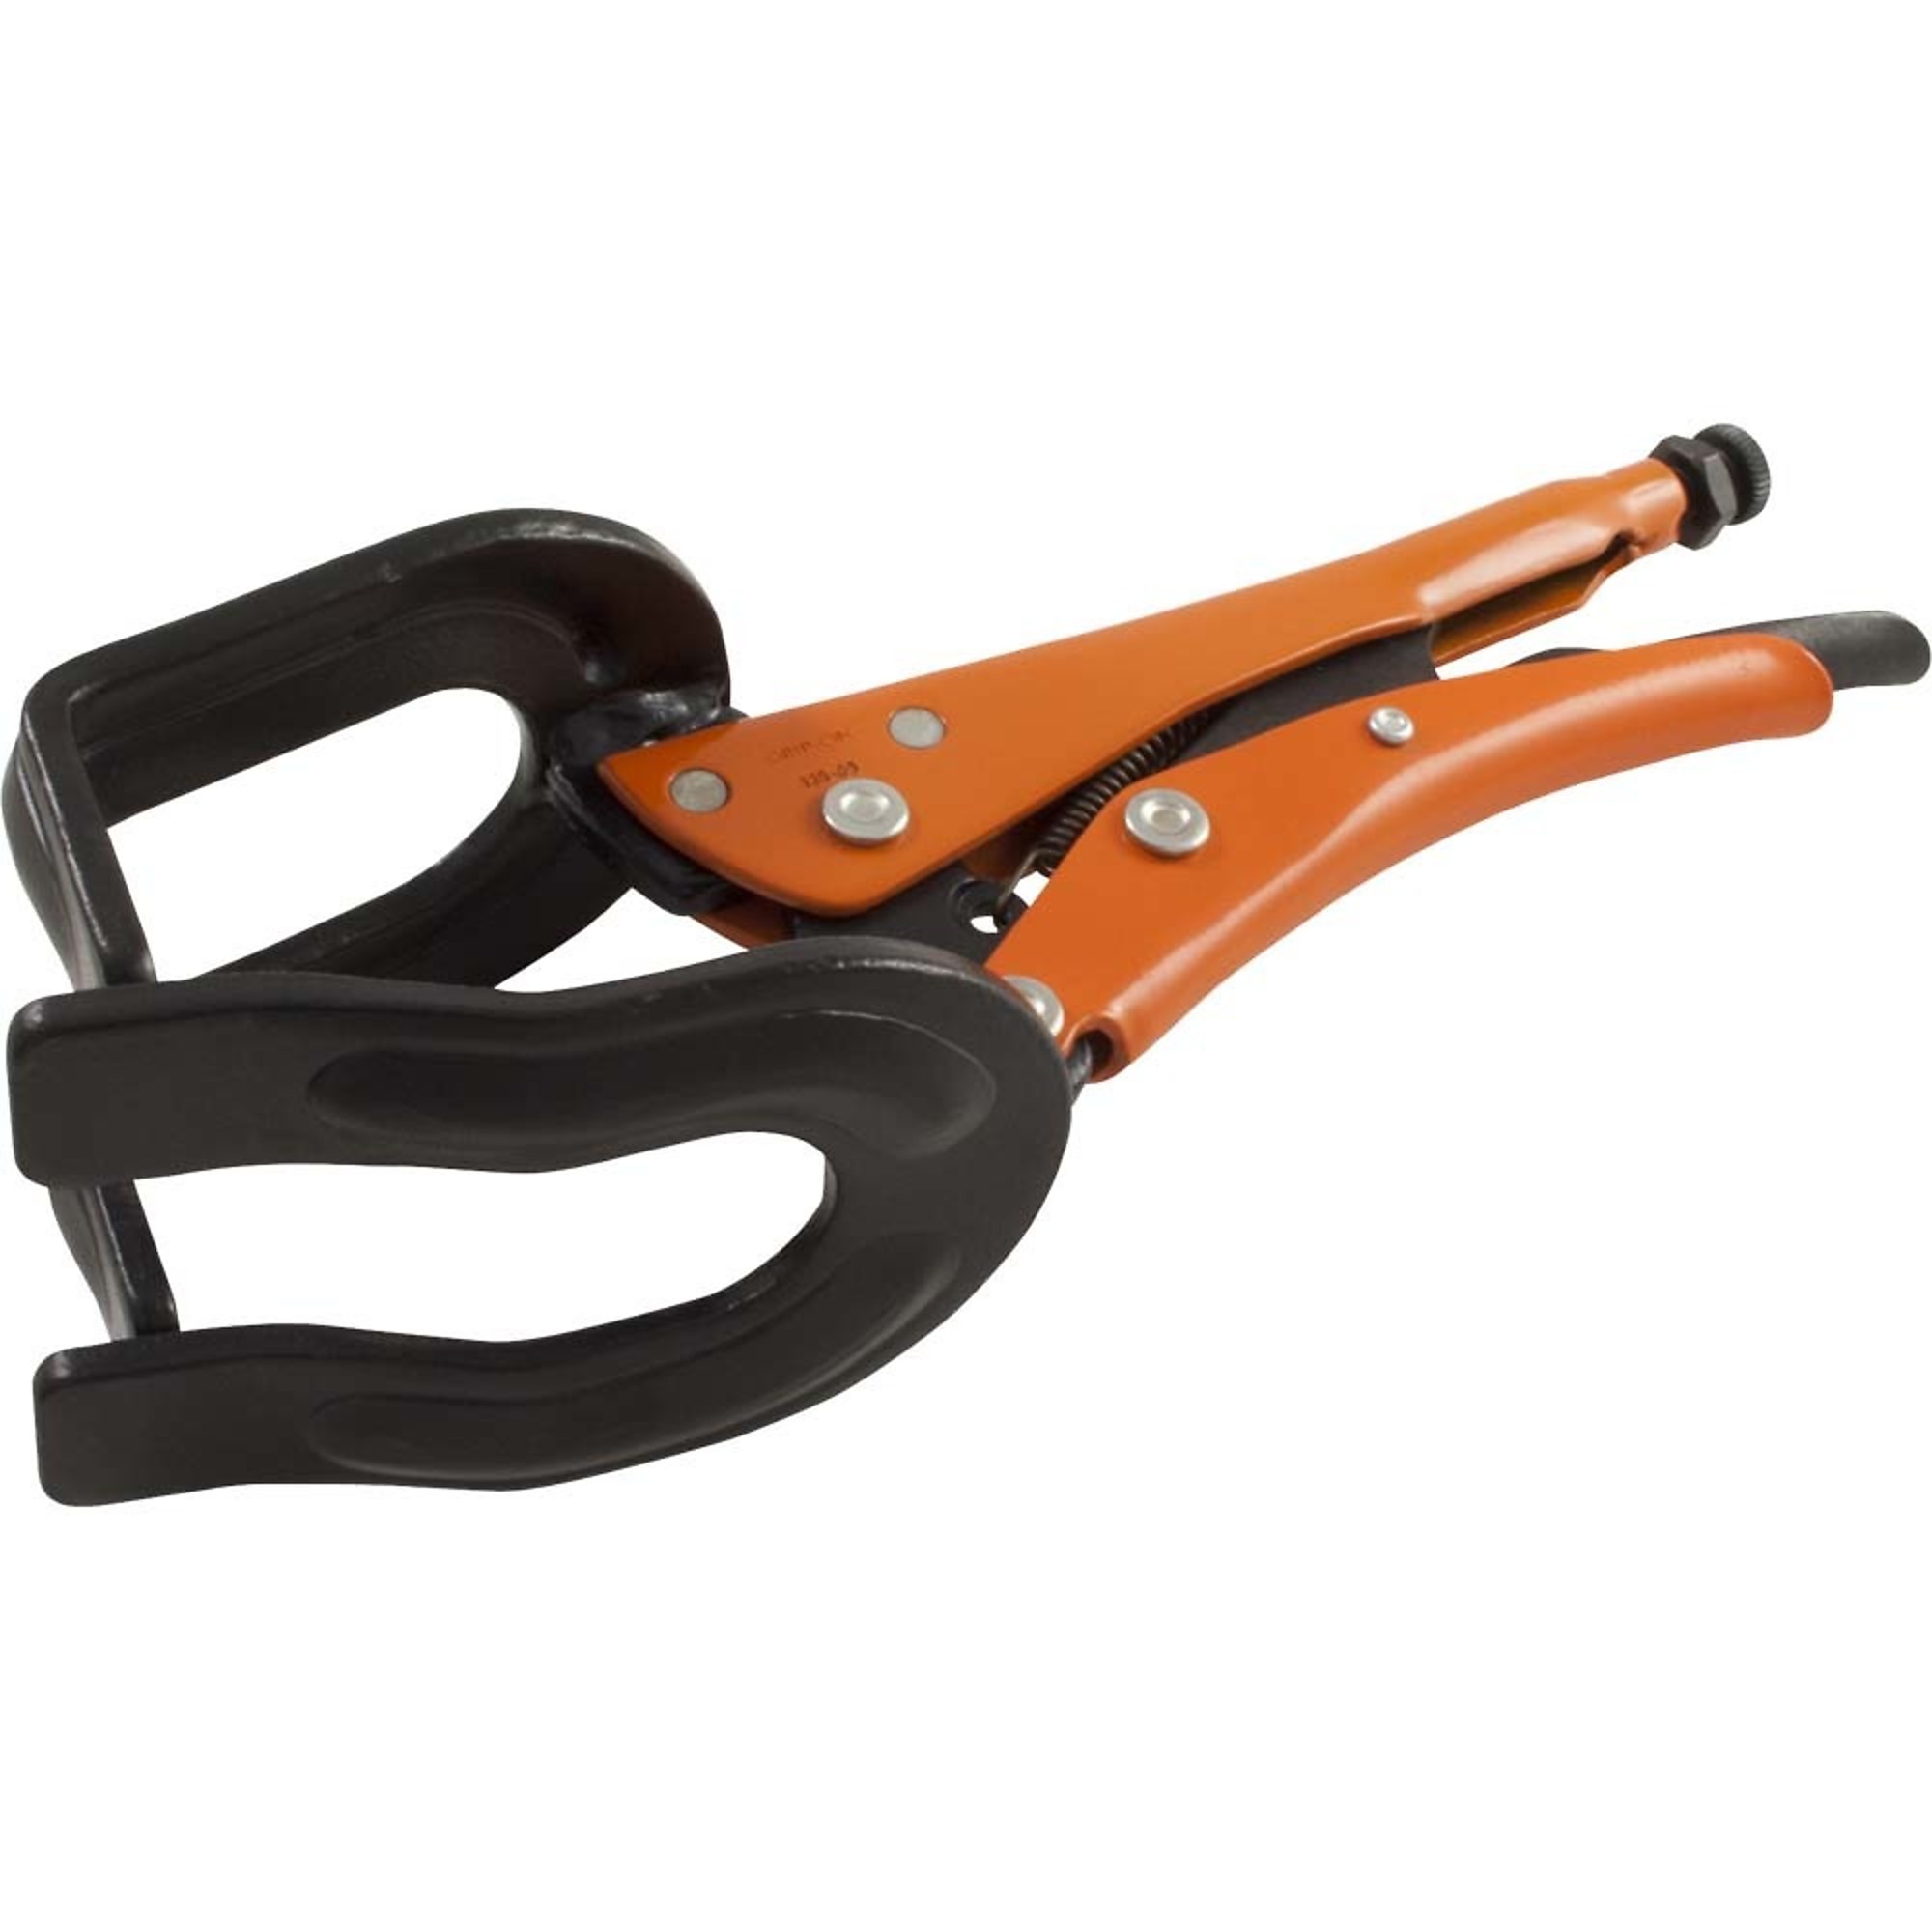 Grip-on, 9Inch Locking U-clamp, 2-15/16Inch Jaw Opening, Pieces (qty.) 1 Material Alloy Steel, Jaw Capacity 2.36 in, Model 125-09